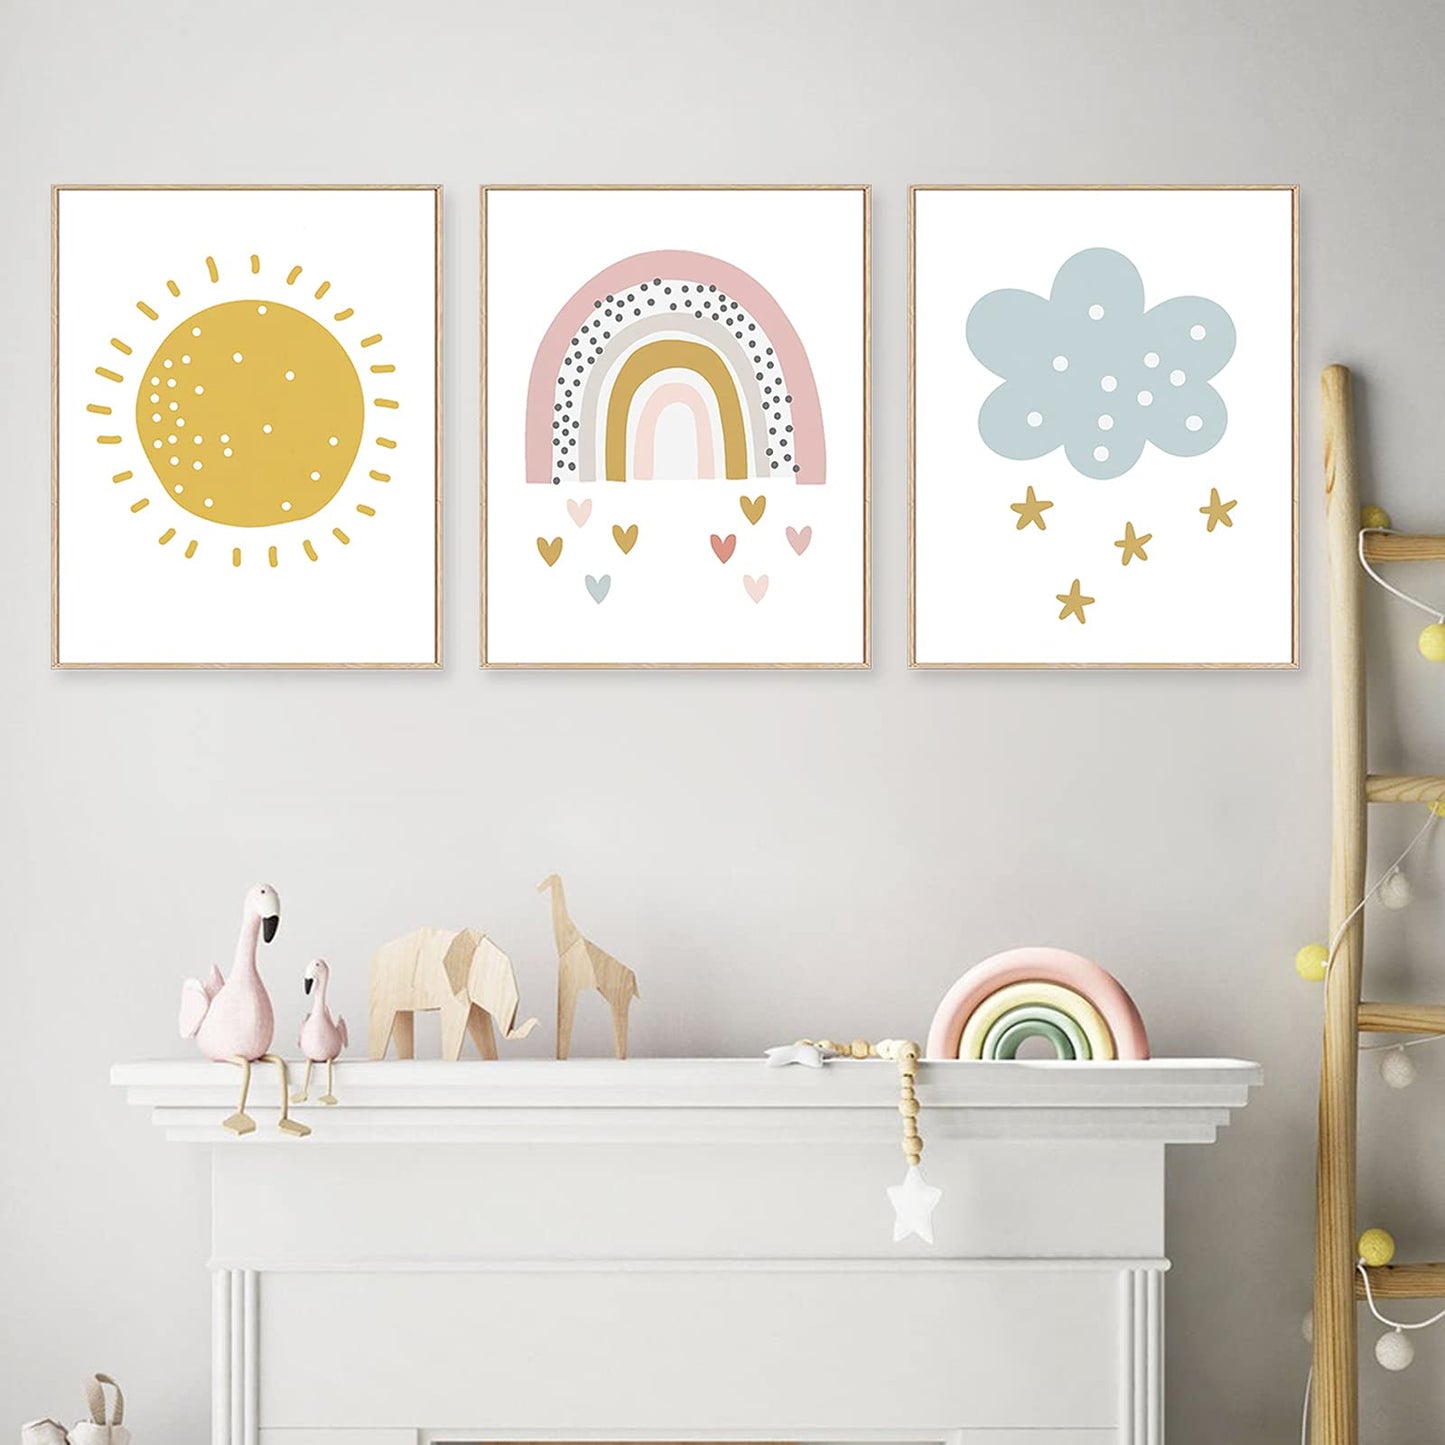 Vlejoy Rainbow Canvas Painting Sunshine Wall Art Print and Cloud Posters Prints for Girls Room Decor Nursery Set of 3 (8x10inch ) No Frame, Love Rainbow, 8 x 10 Inch